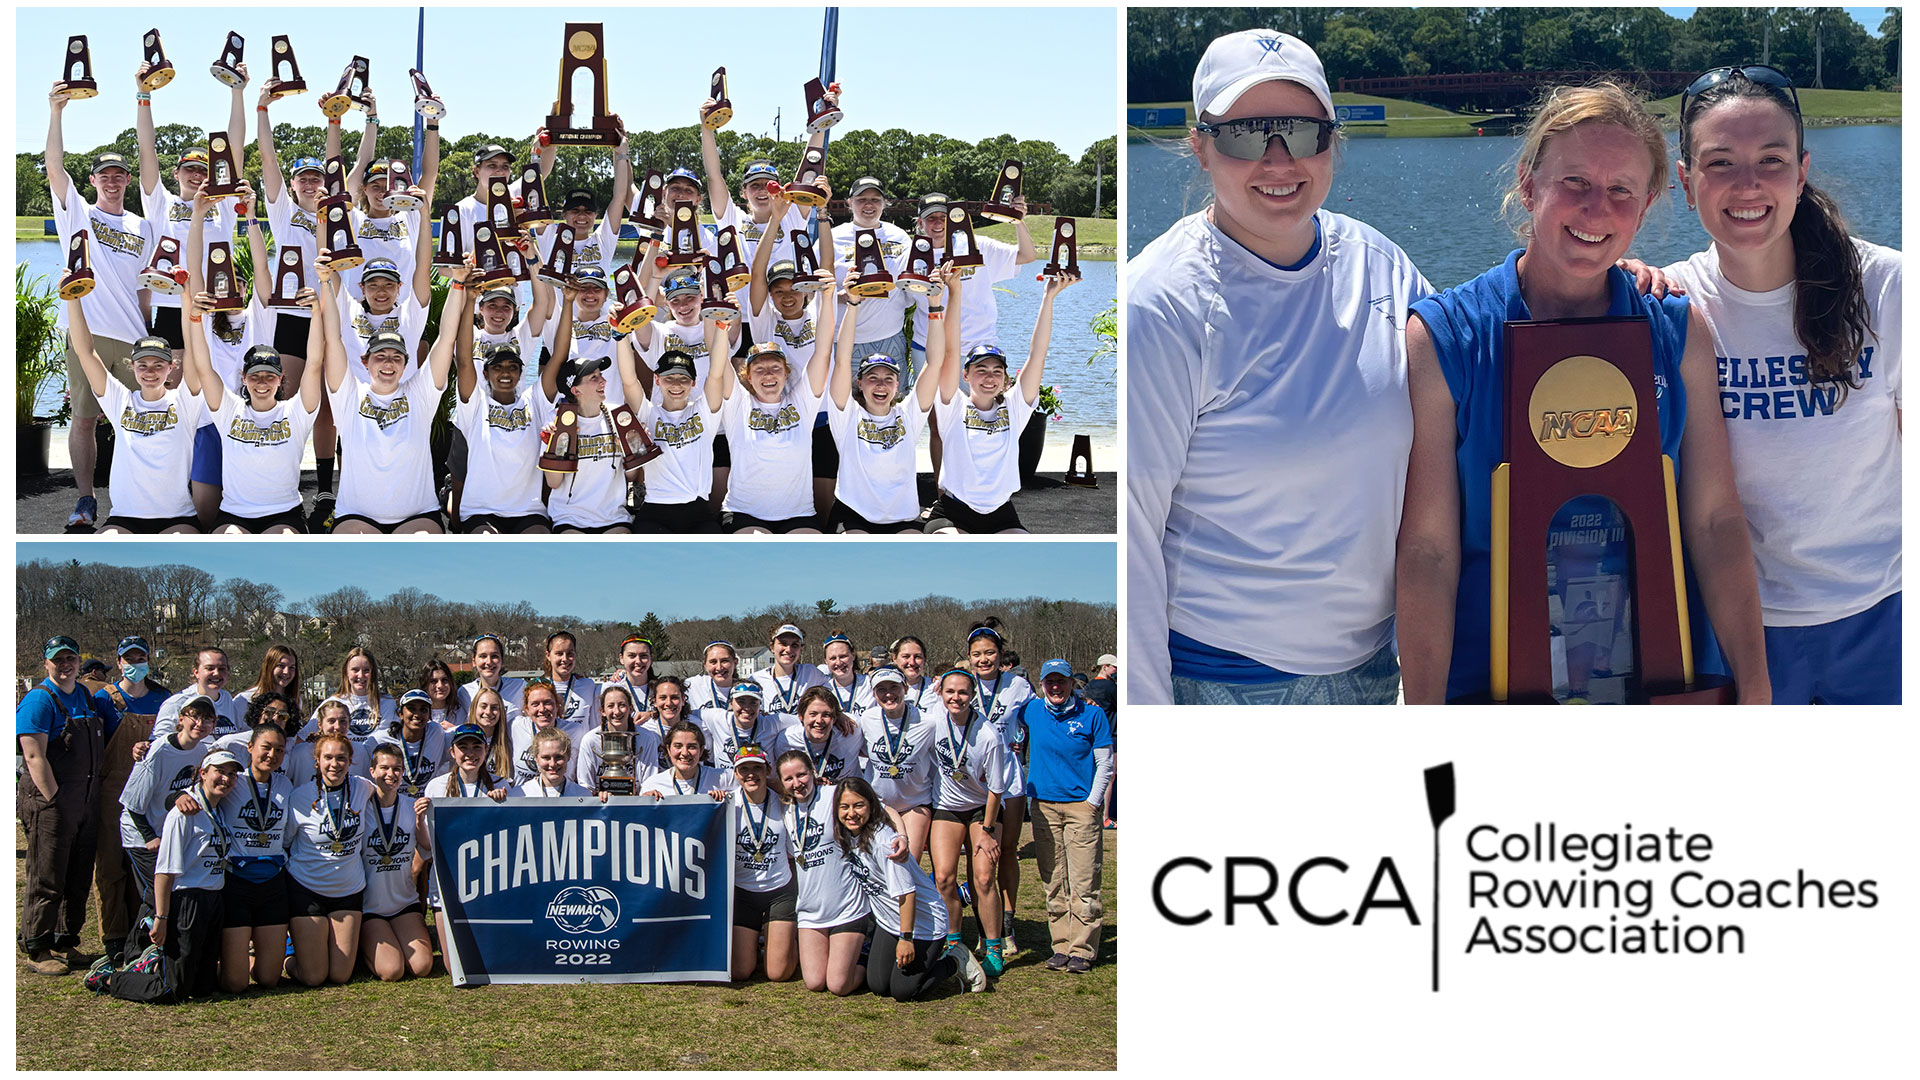 Blue Crew's Spillane, Muller, Ball Named CRCA Division III National Coach and Staff of the Year